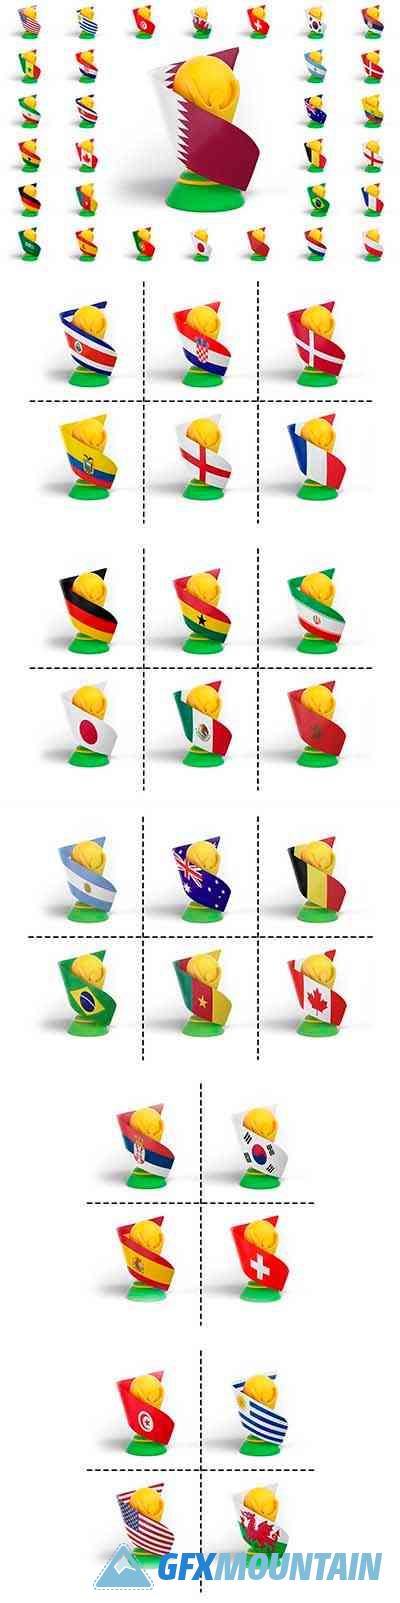 Flags World Cup - 10846373